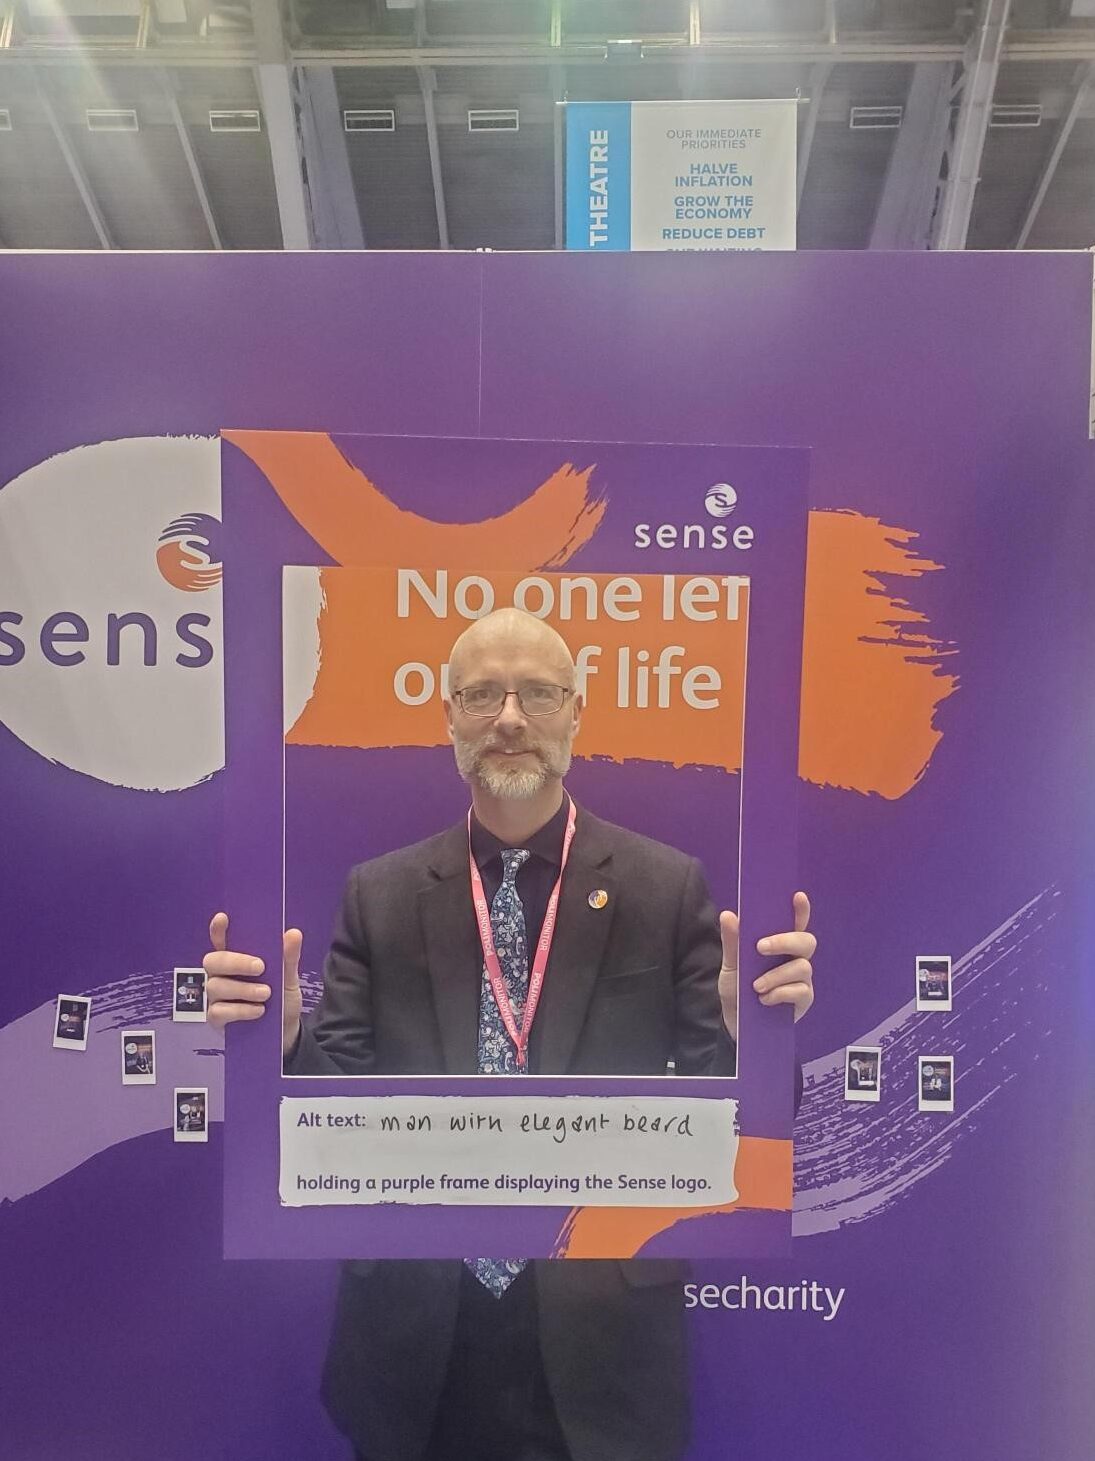 Michael, a man with a beard, holding a purple frame saying ‘man with elegant beard holding a purple frame displaying a Sense logo’ he is in front of a purple background with the Sense logo on